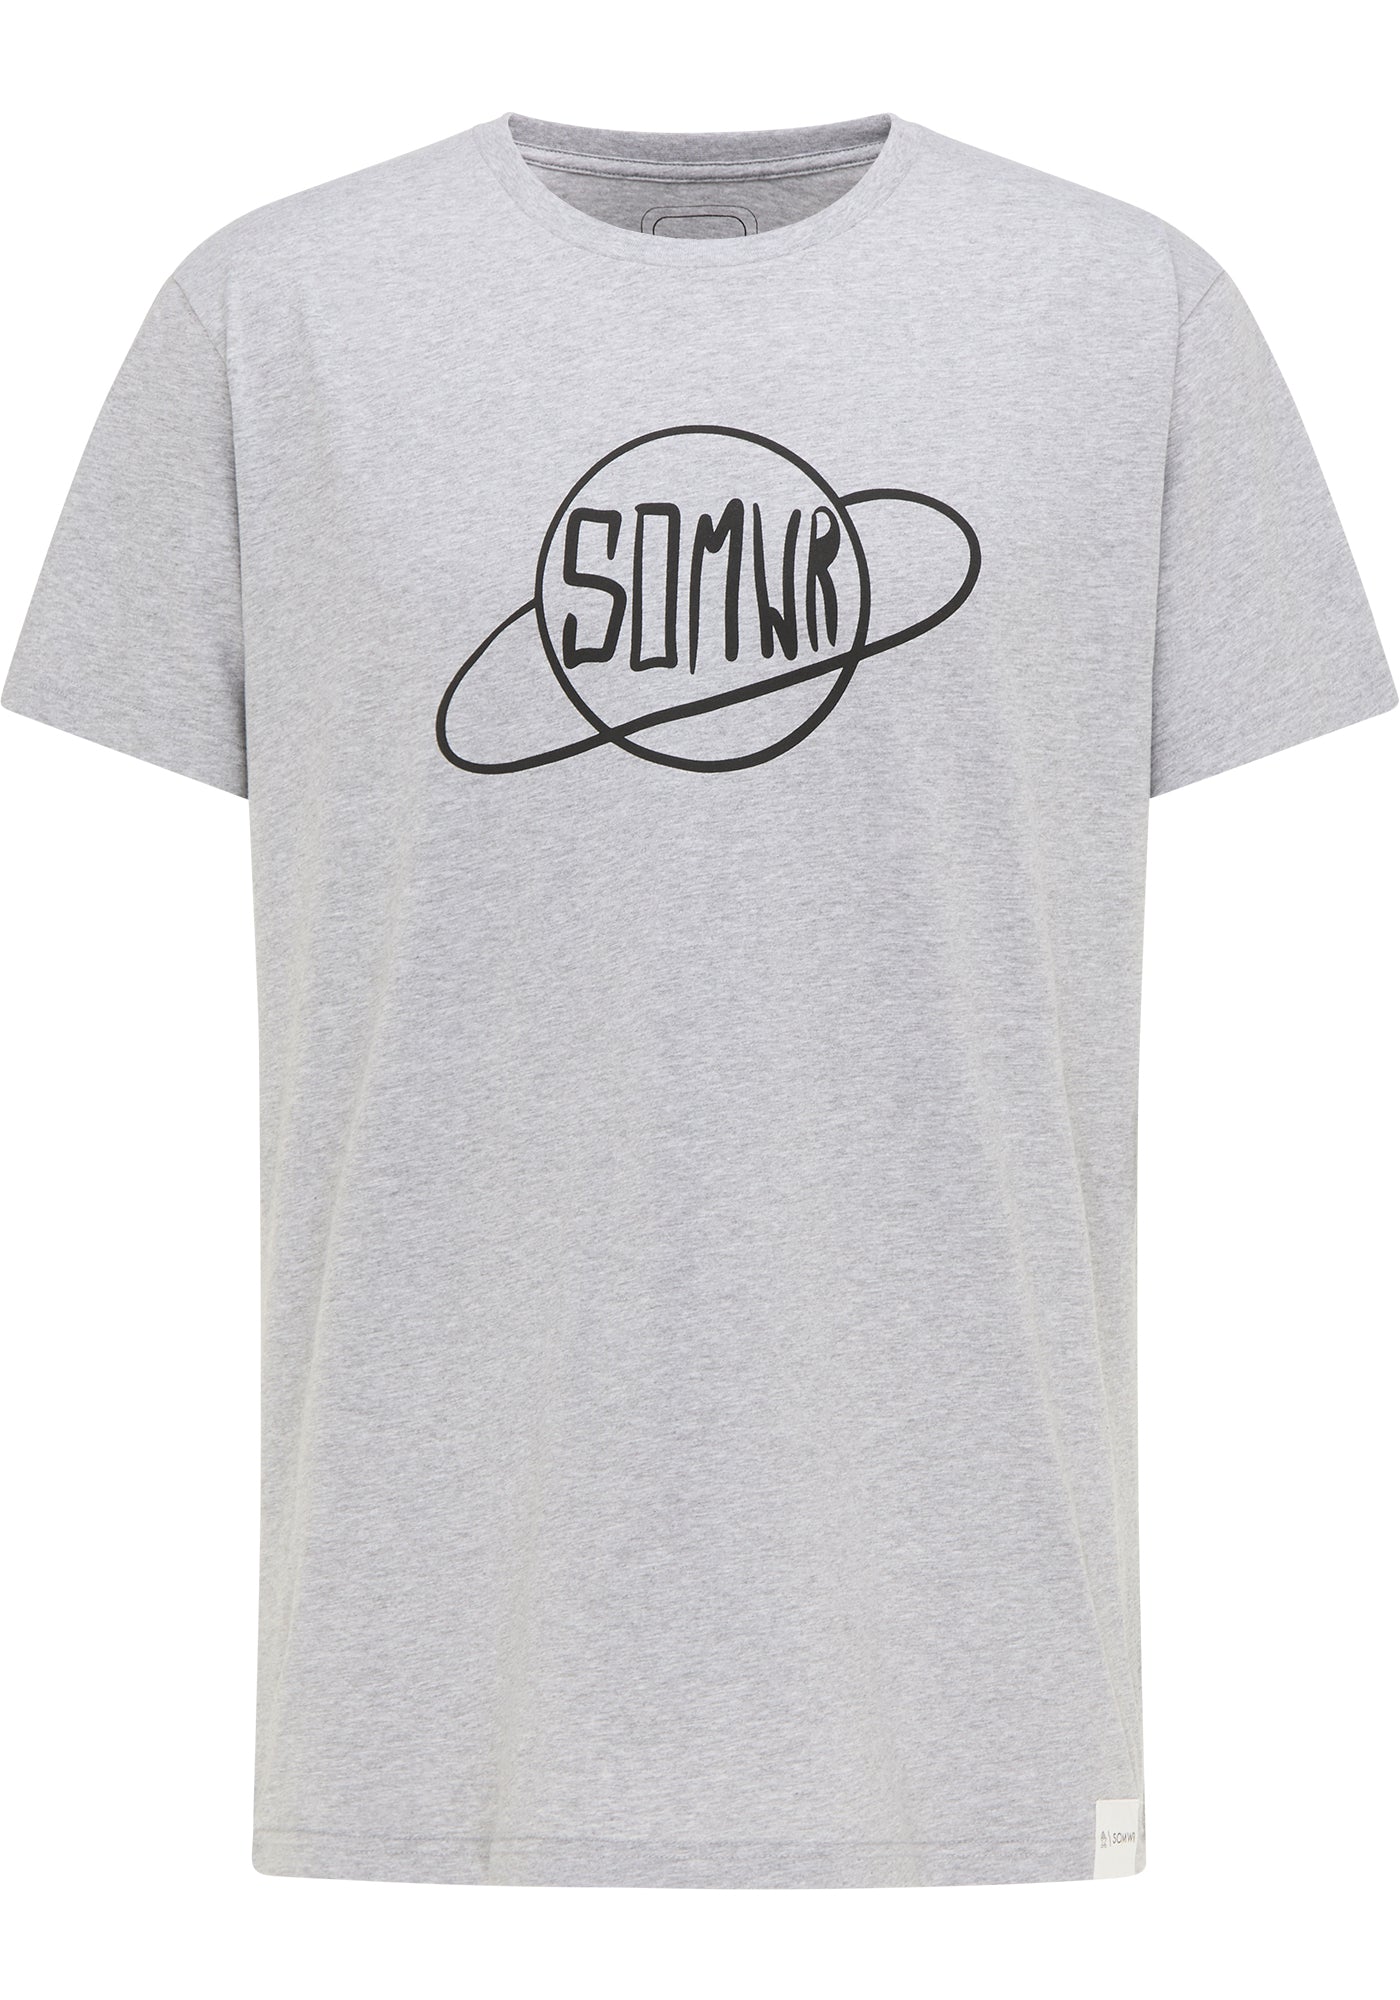 SOMWR PLANET SPHERE TEE T-Shirt GRY002